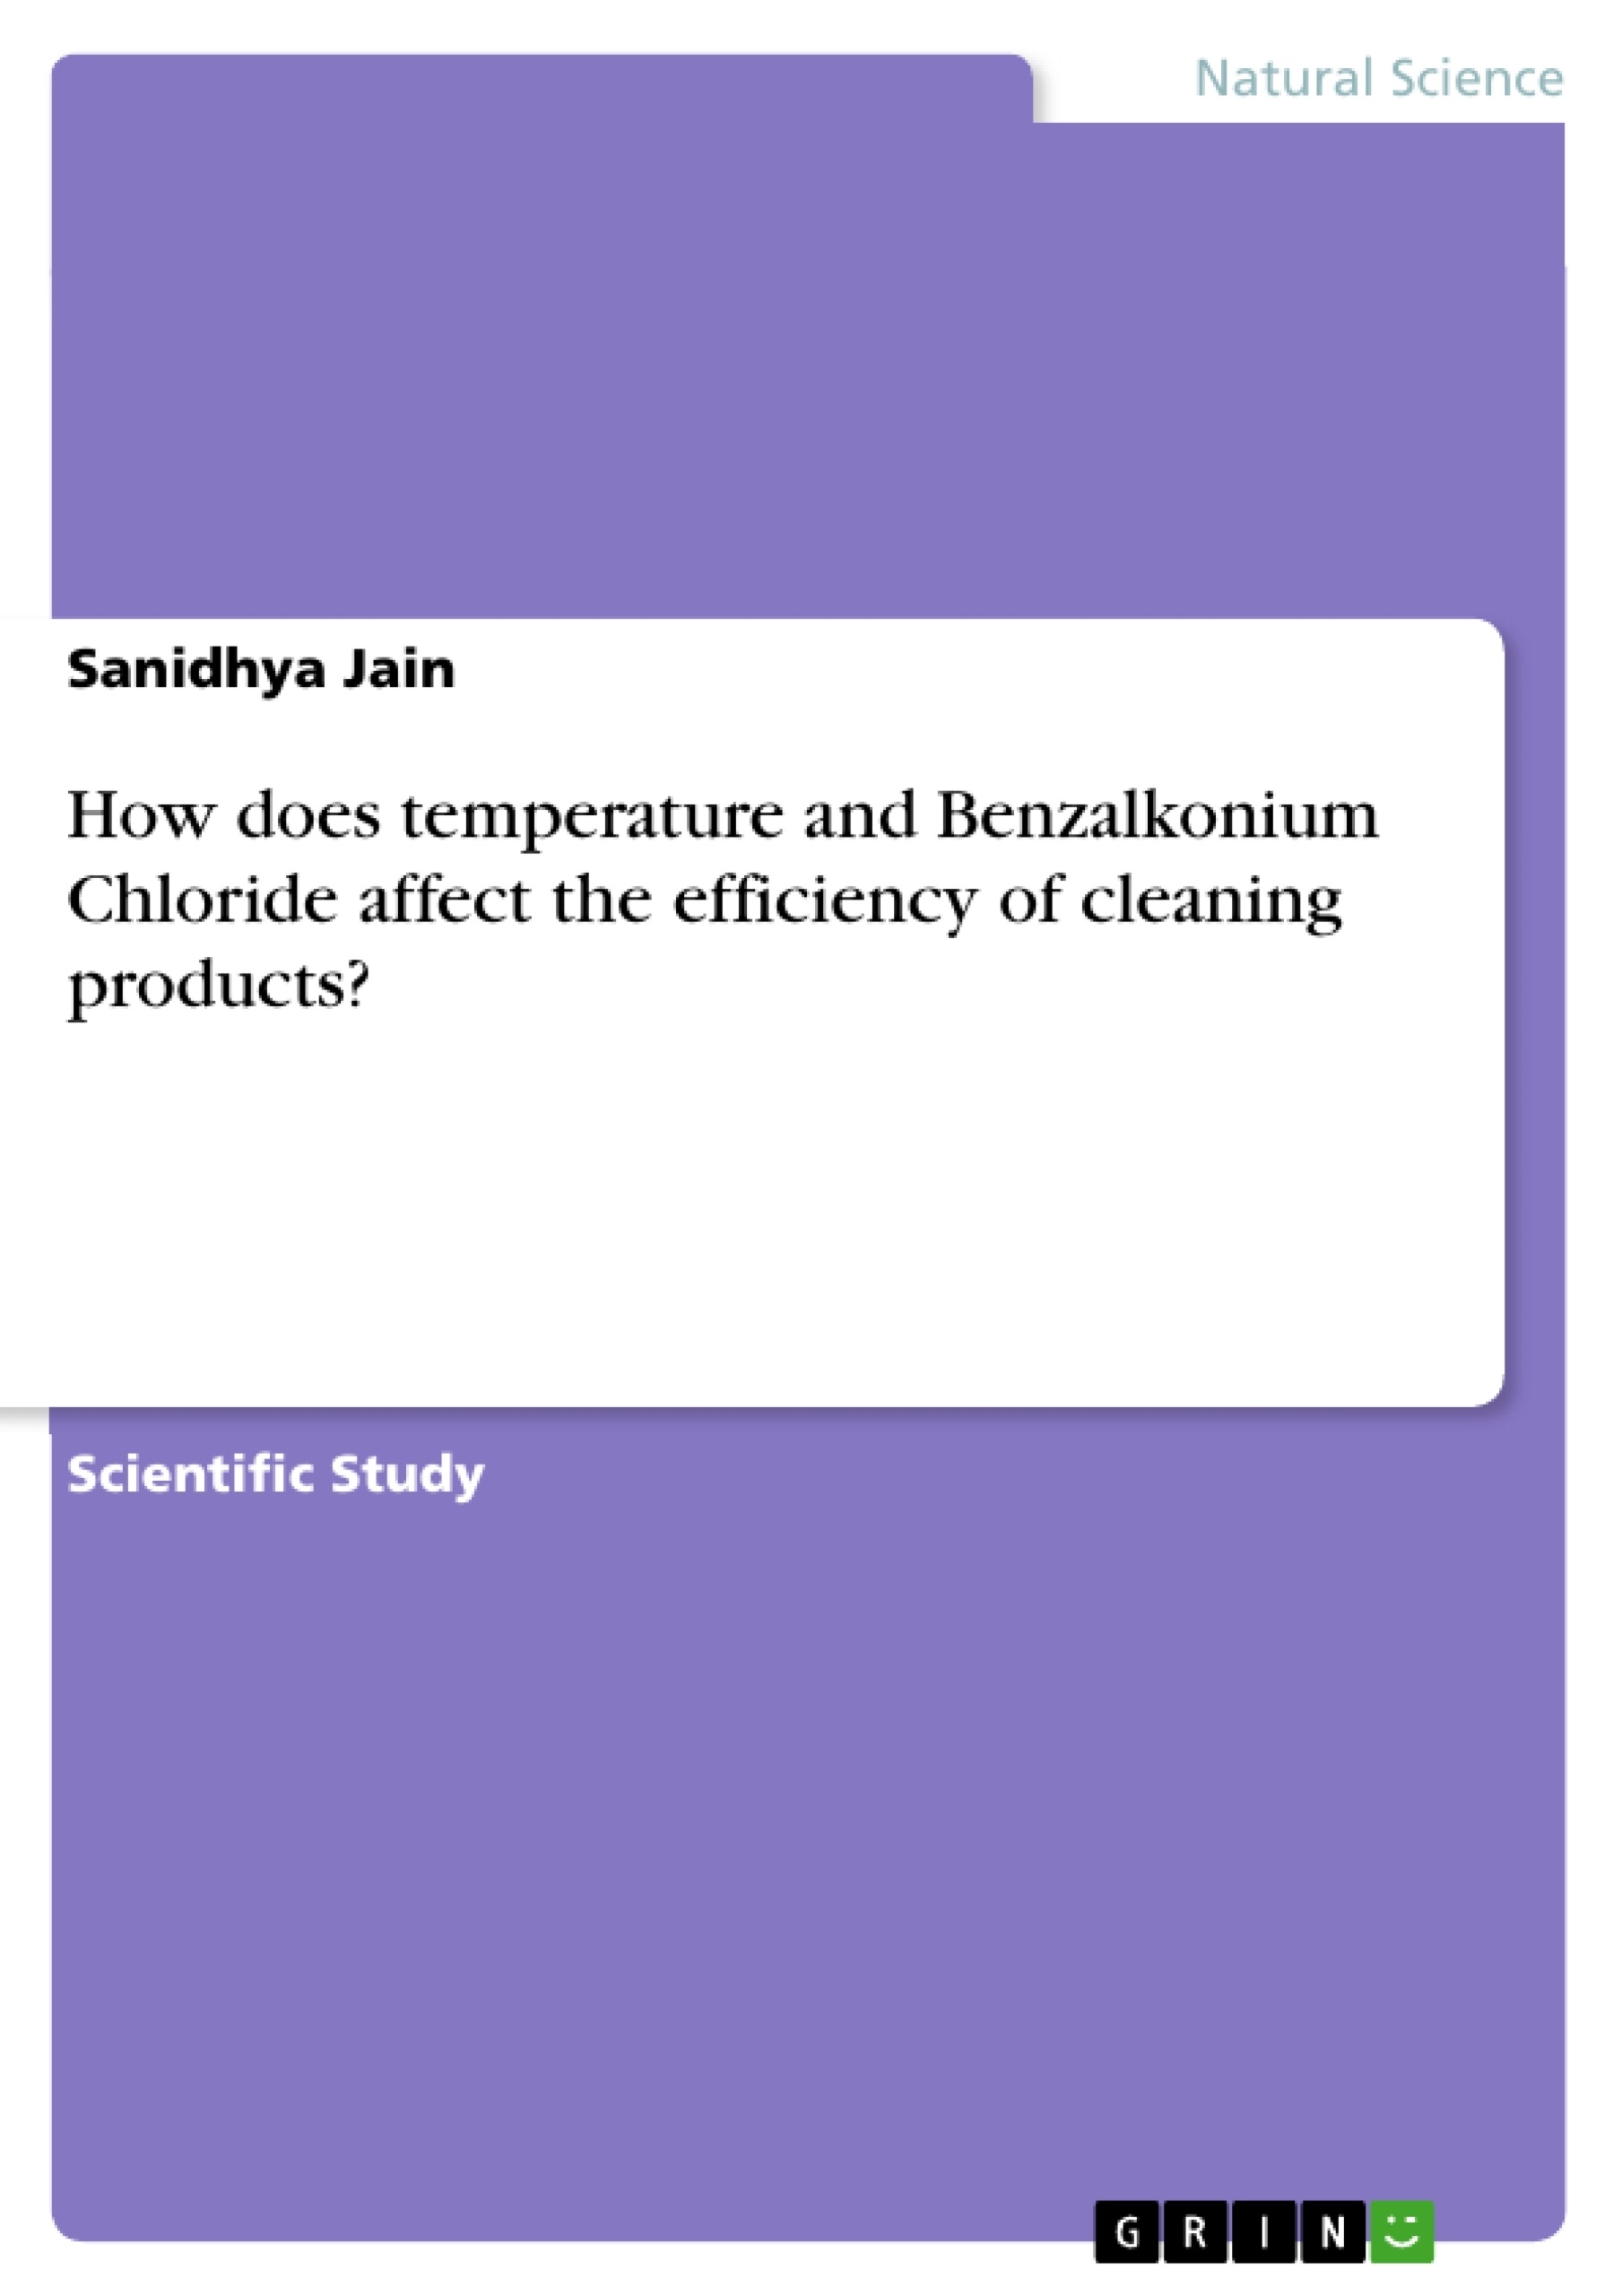 Title: How does temperature and Benzalkonium Chloride affect the efficiency of cleaning products?